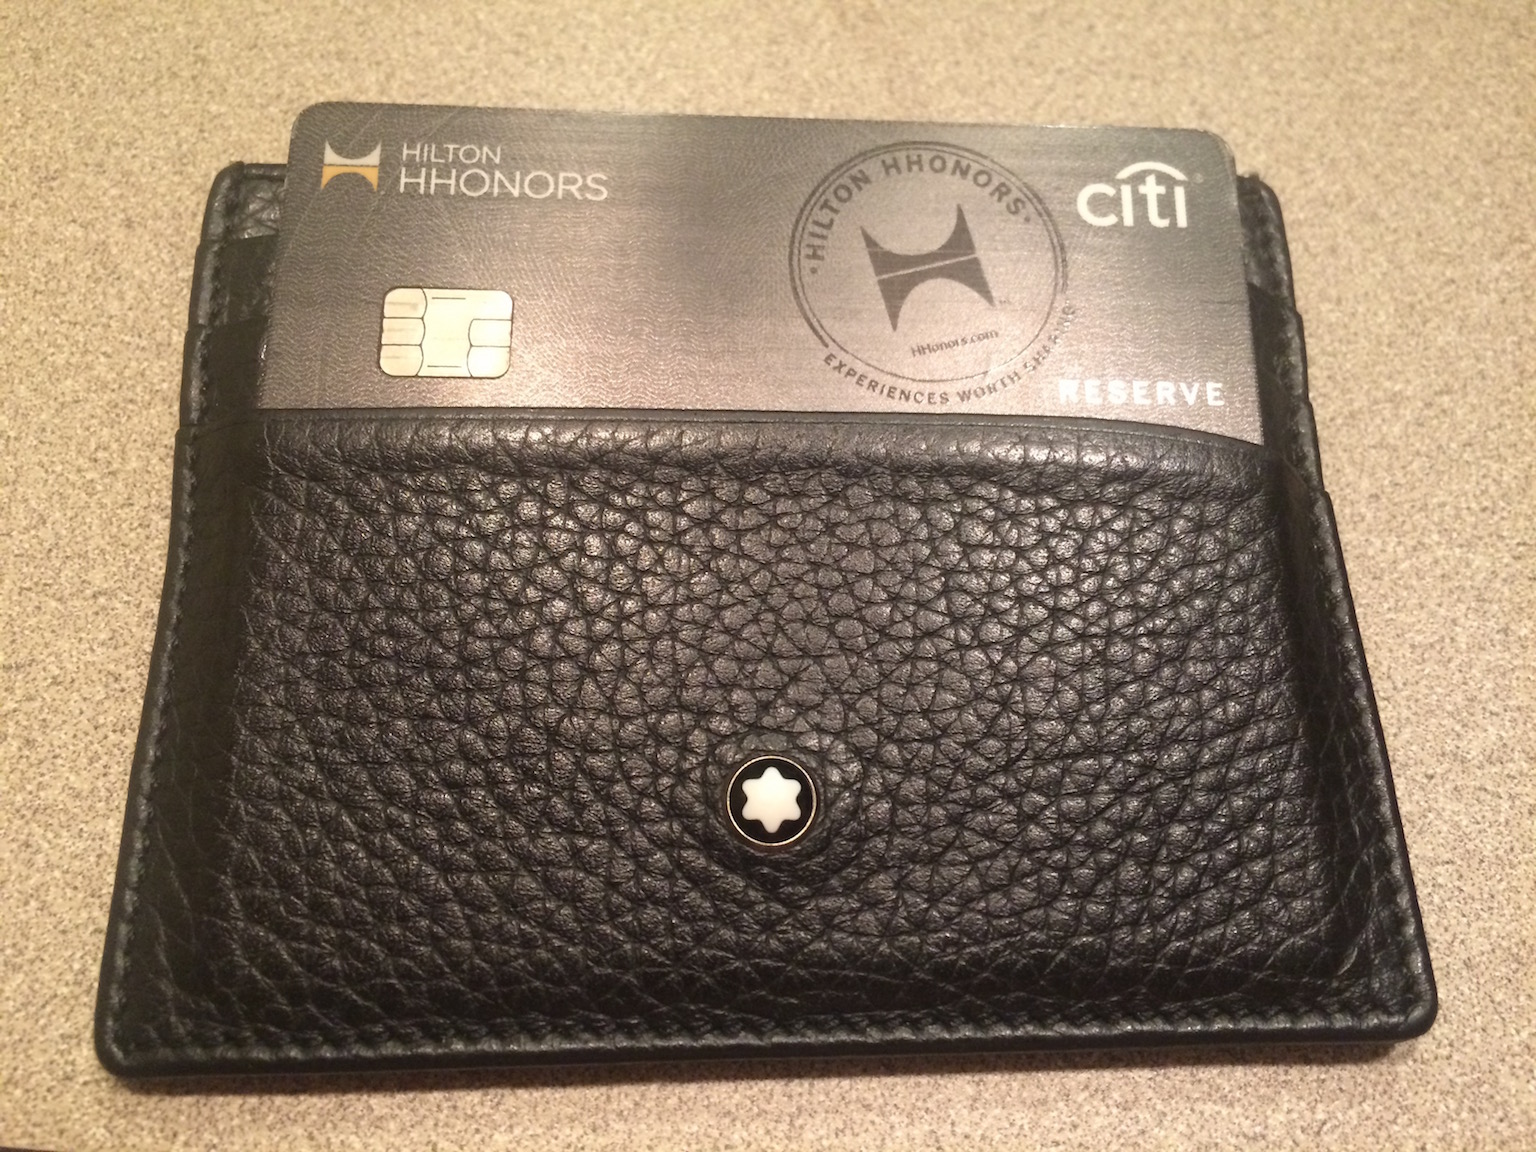 Last Chance To Product Change Citi Hilton Credit Cards?